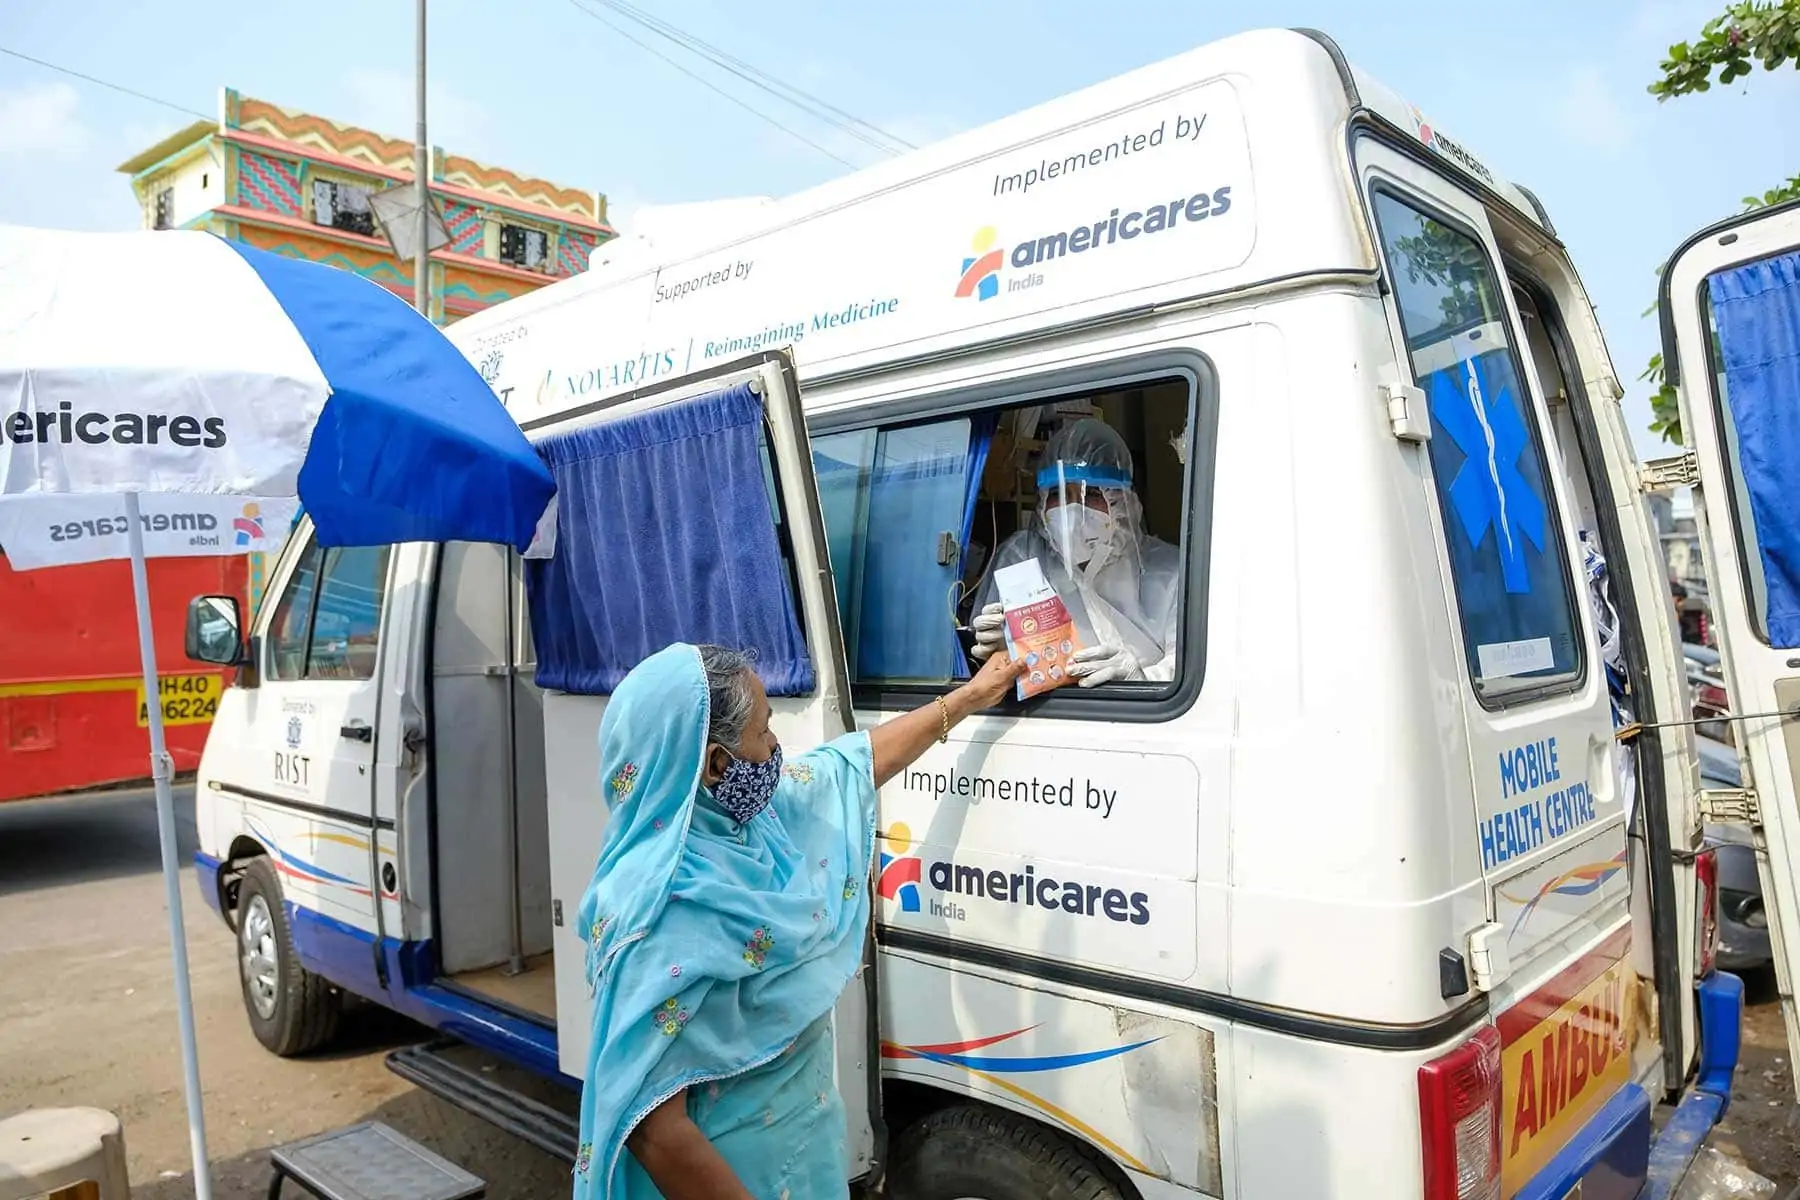 Americares plans to provide expanded support to 30 health facilities in the 10 states with the highest case counts.